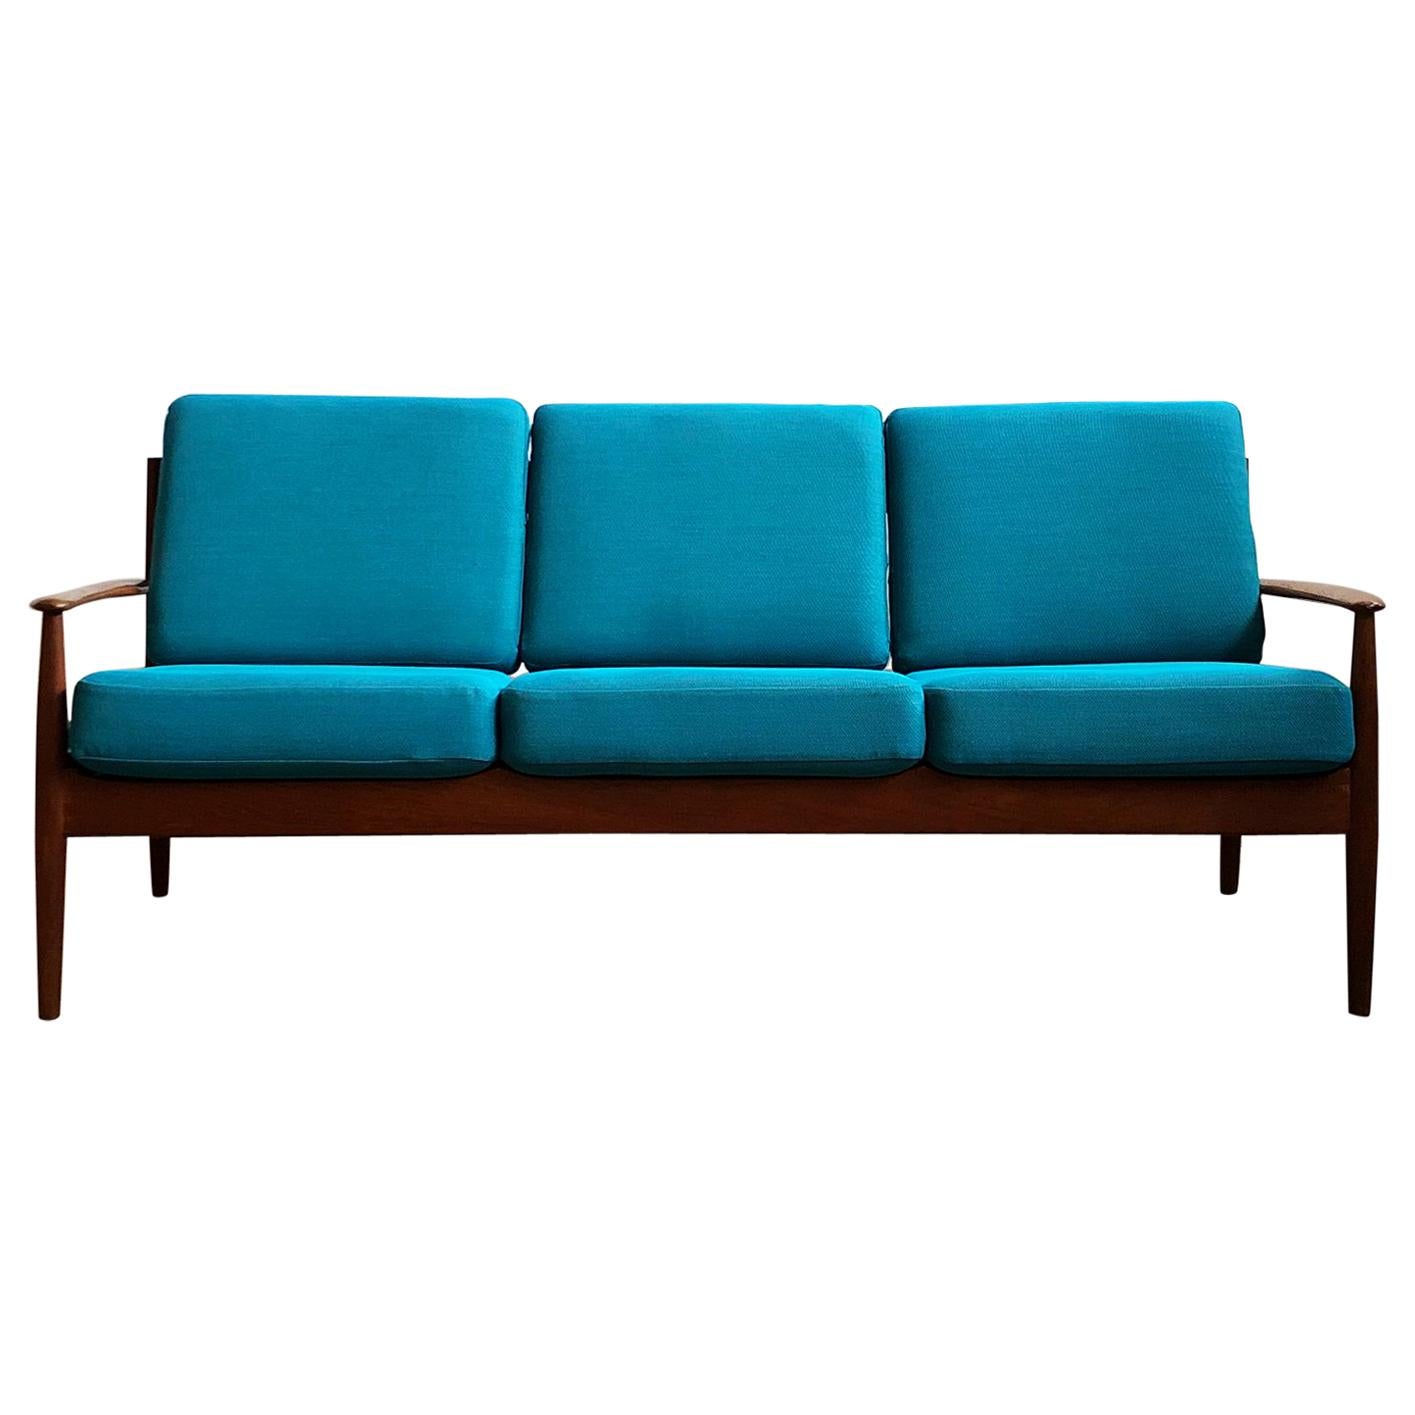 Midcentury Teak Sofa with Turquoise Upholstery by Grete Jalk for France & Son  For Sale